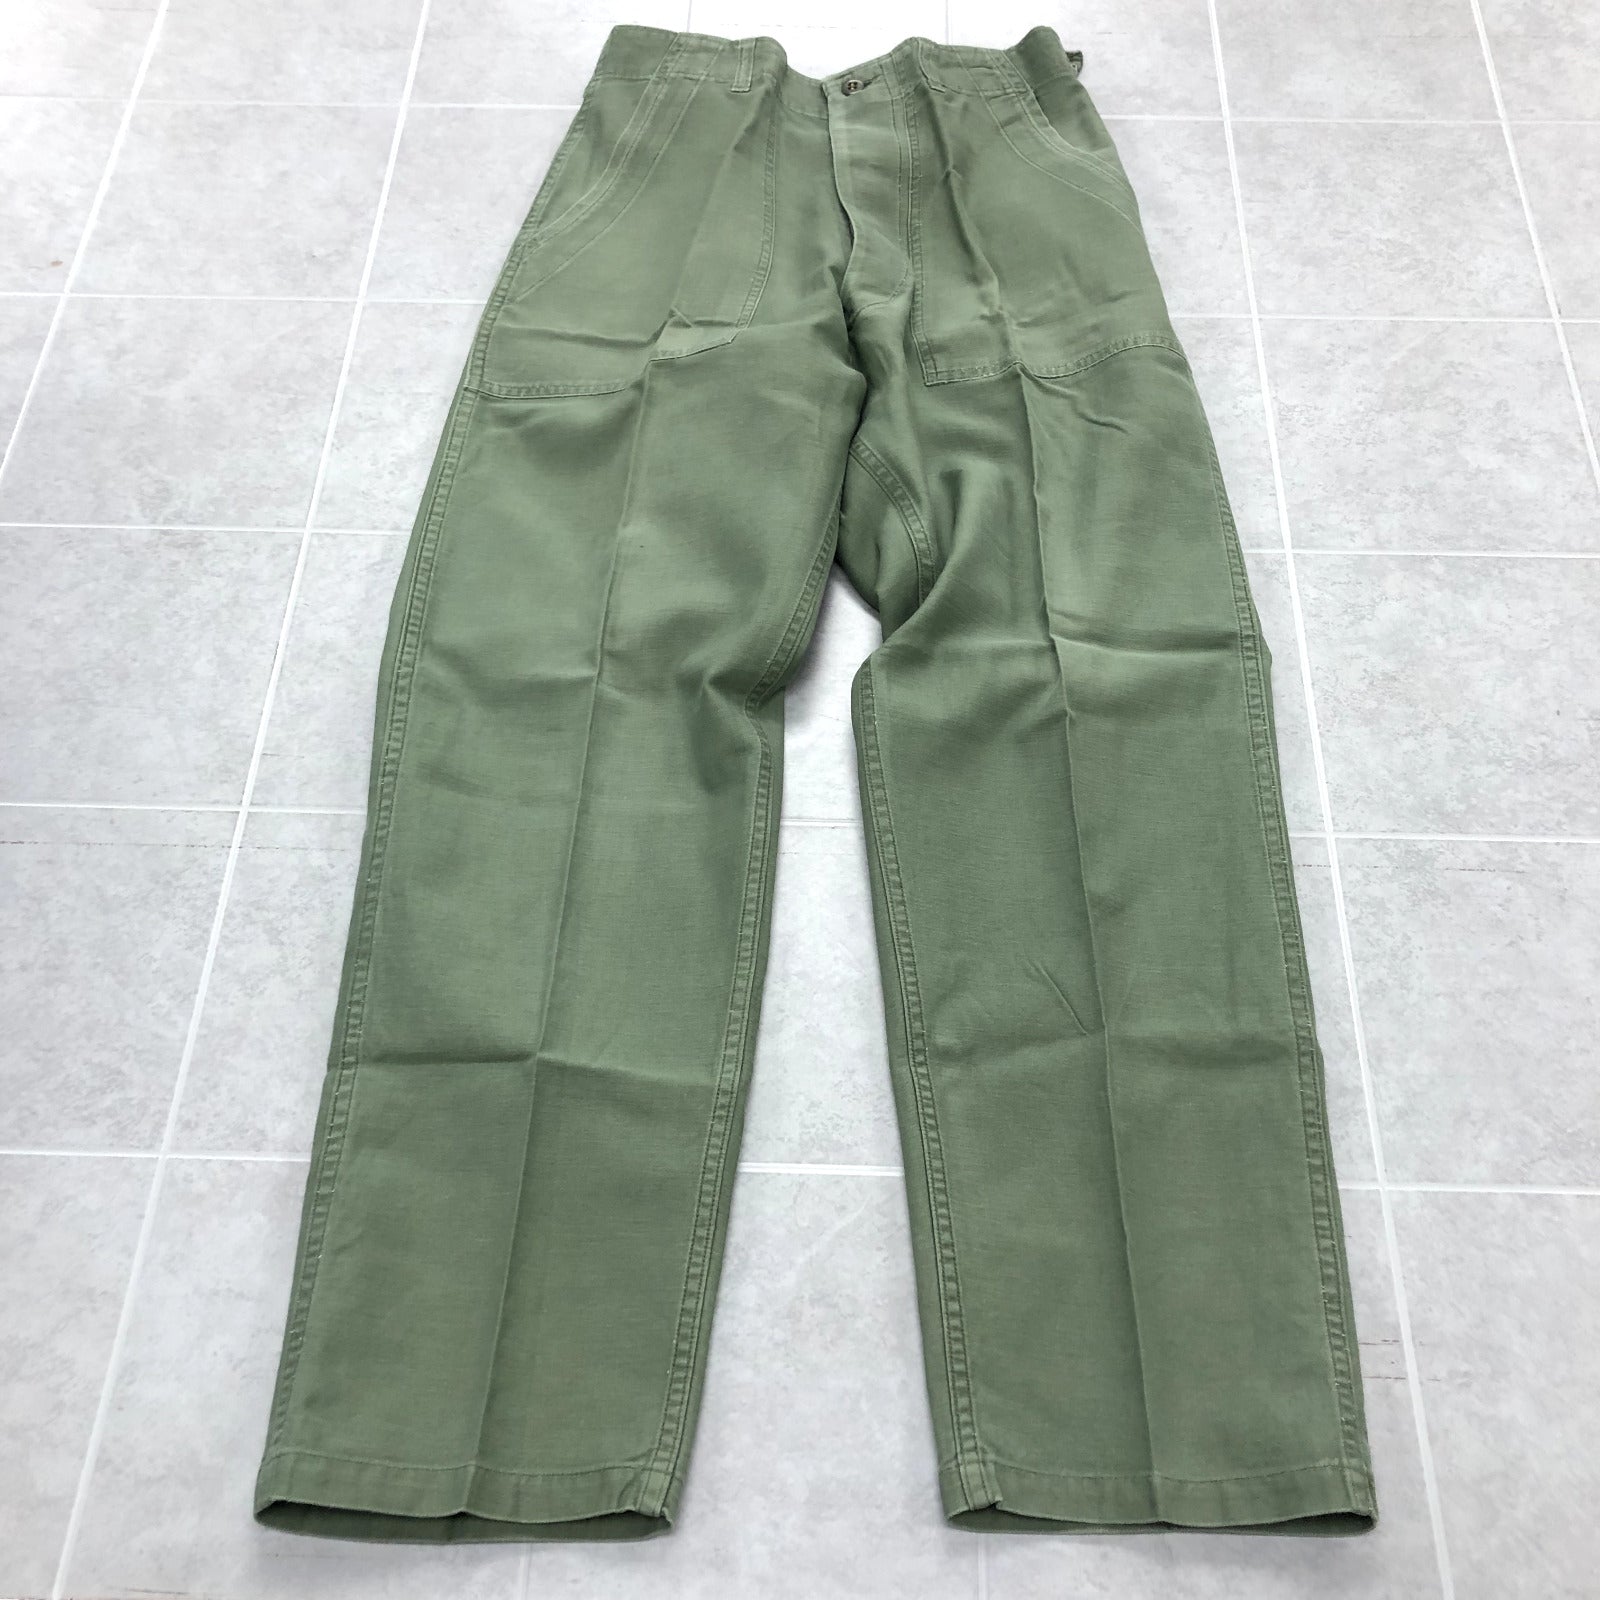 Vintage US Military Green Straight legged High-Rise Pants Adult Size 28 x 31